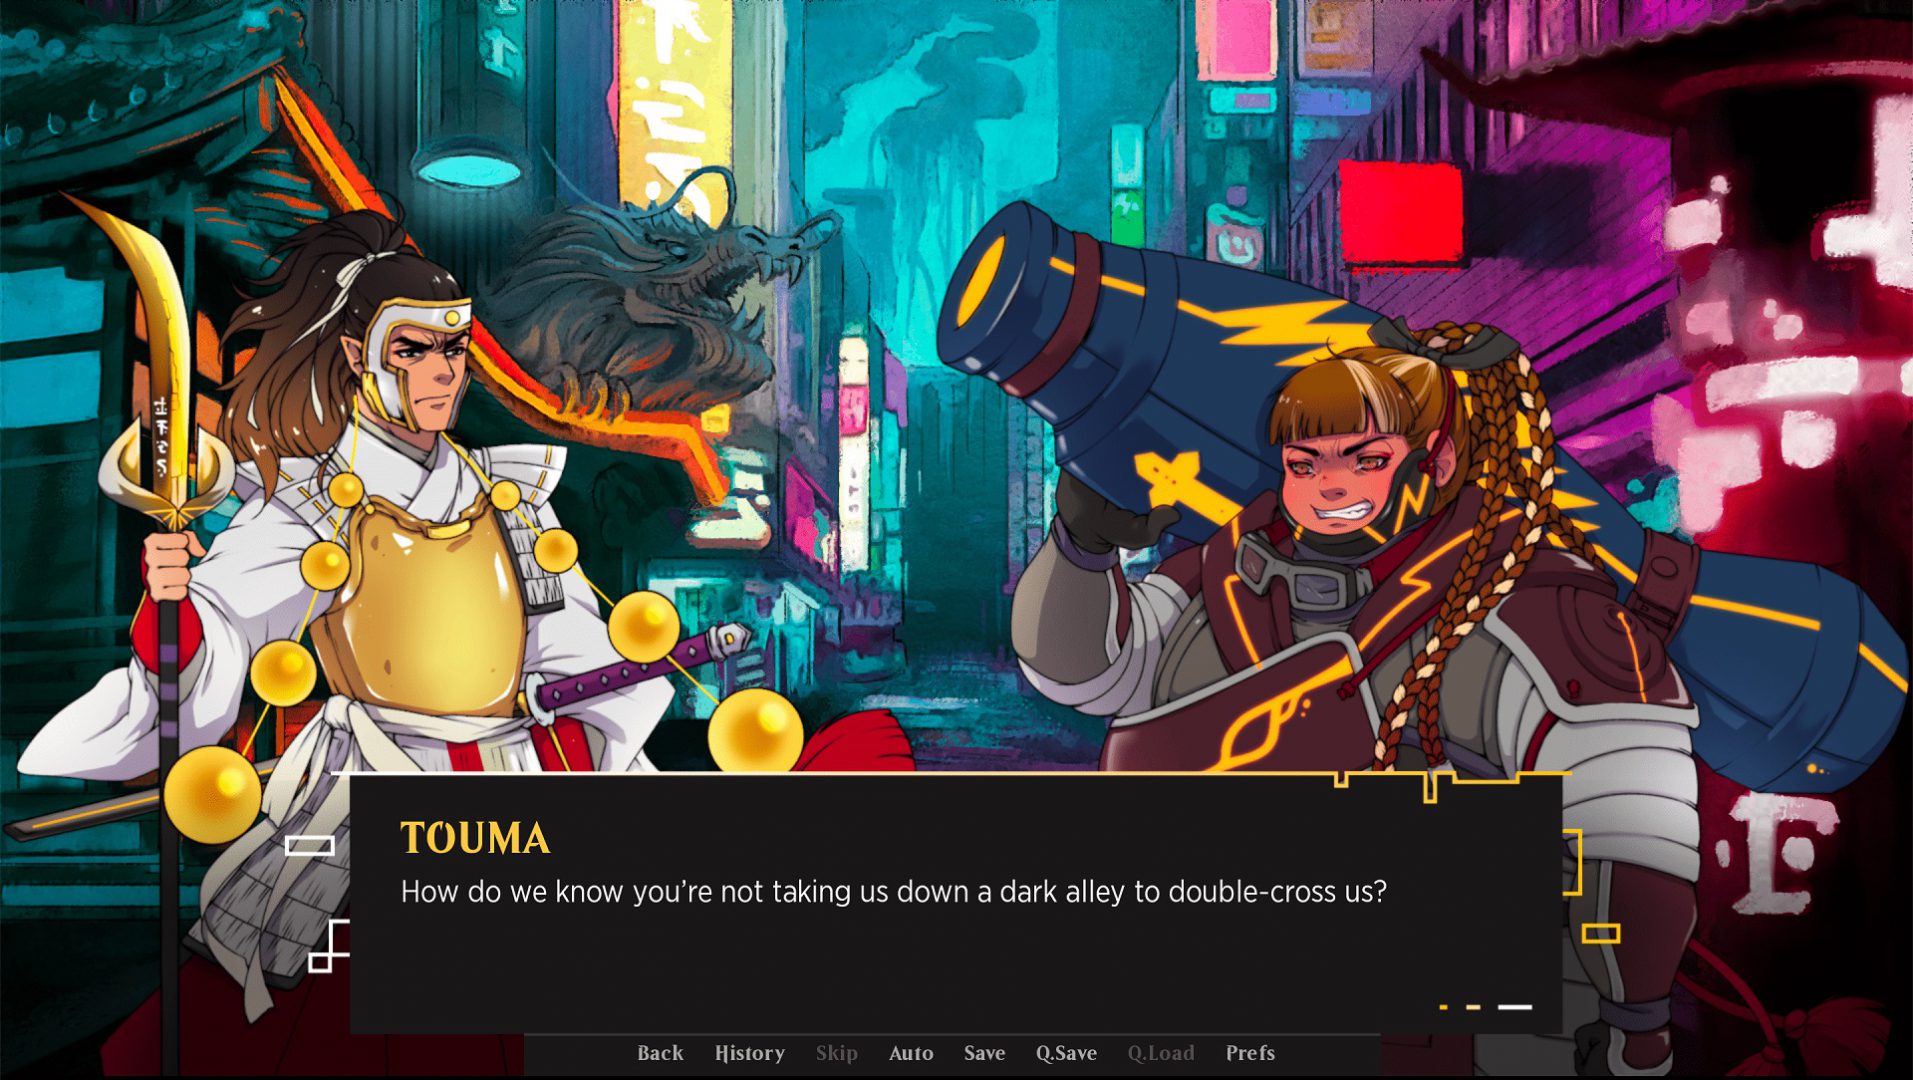 Download free this new game for PC - Download free Kamigawa Visual Novel, a game based on Magic: The Gathering translated into Spanish and with game horas.